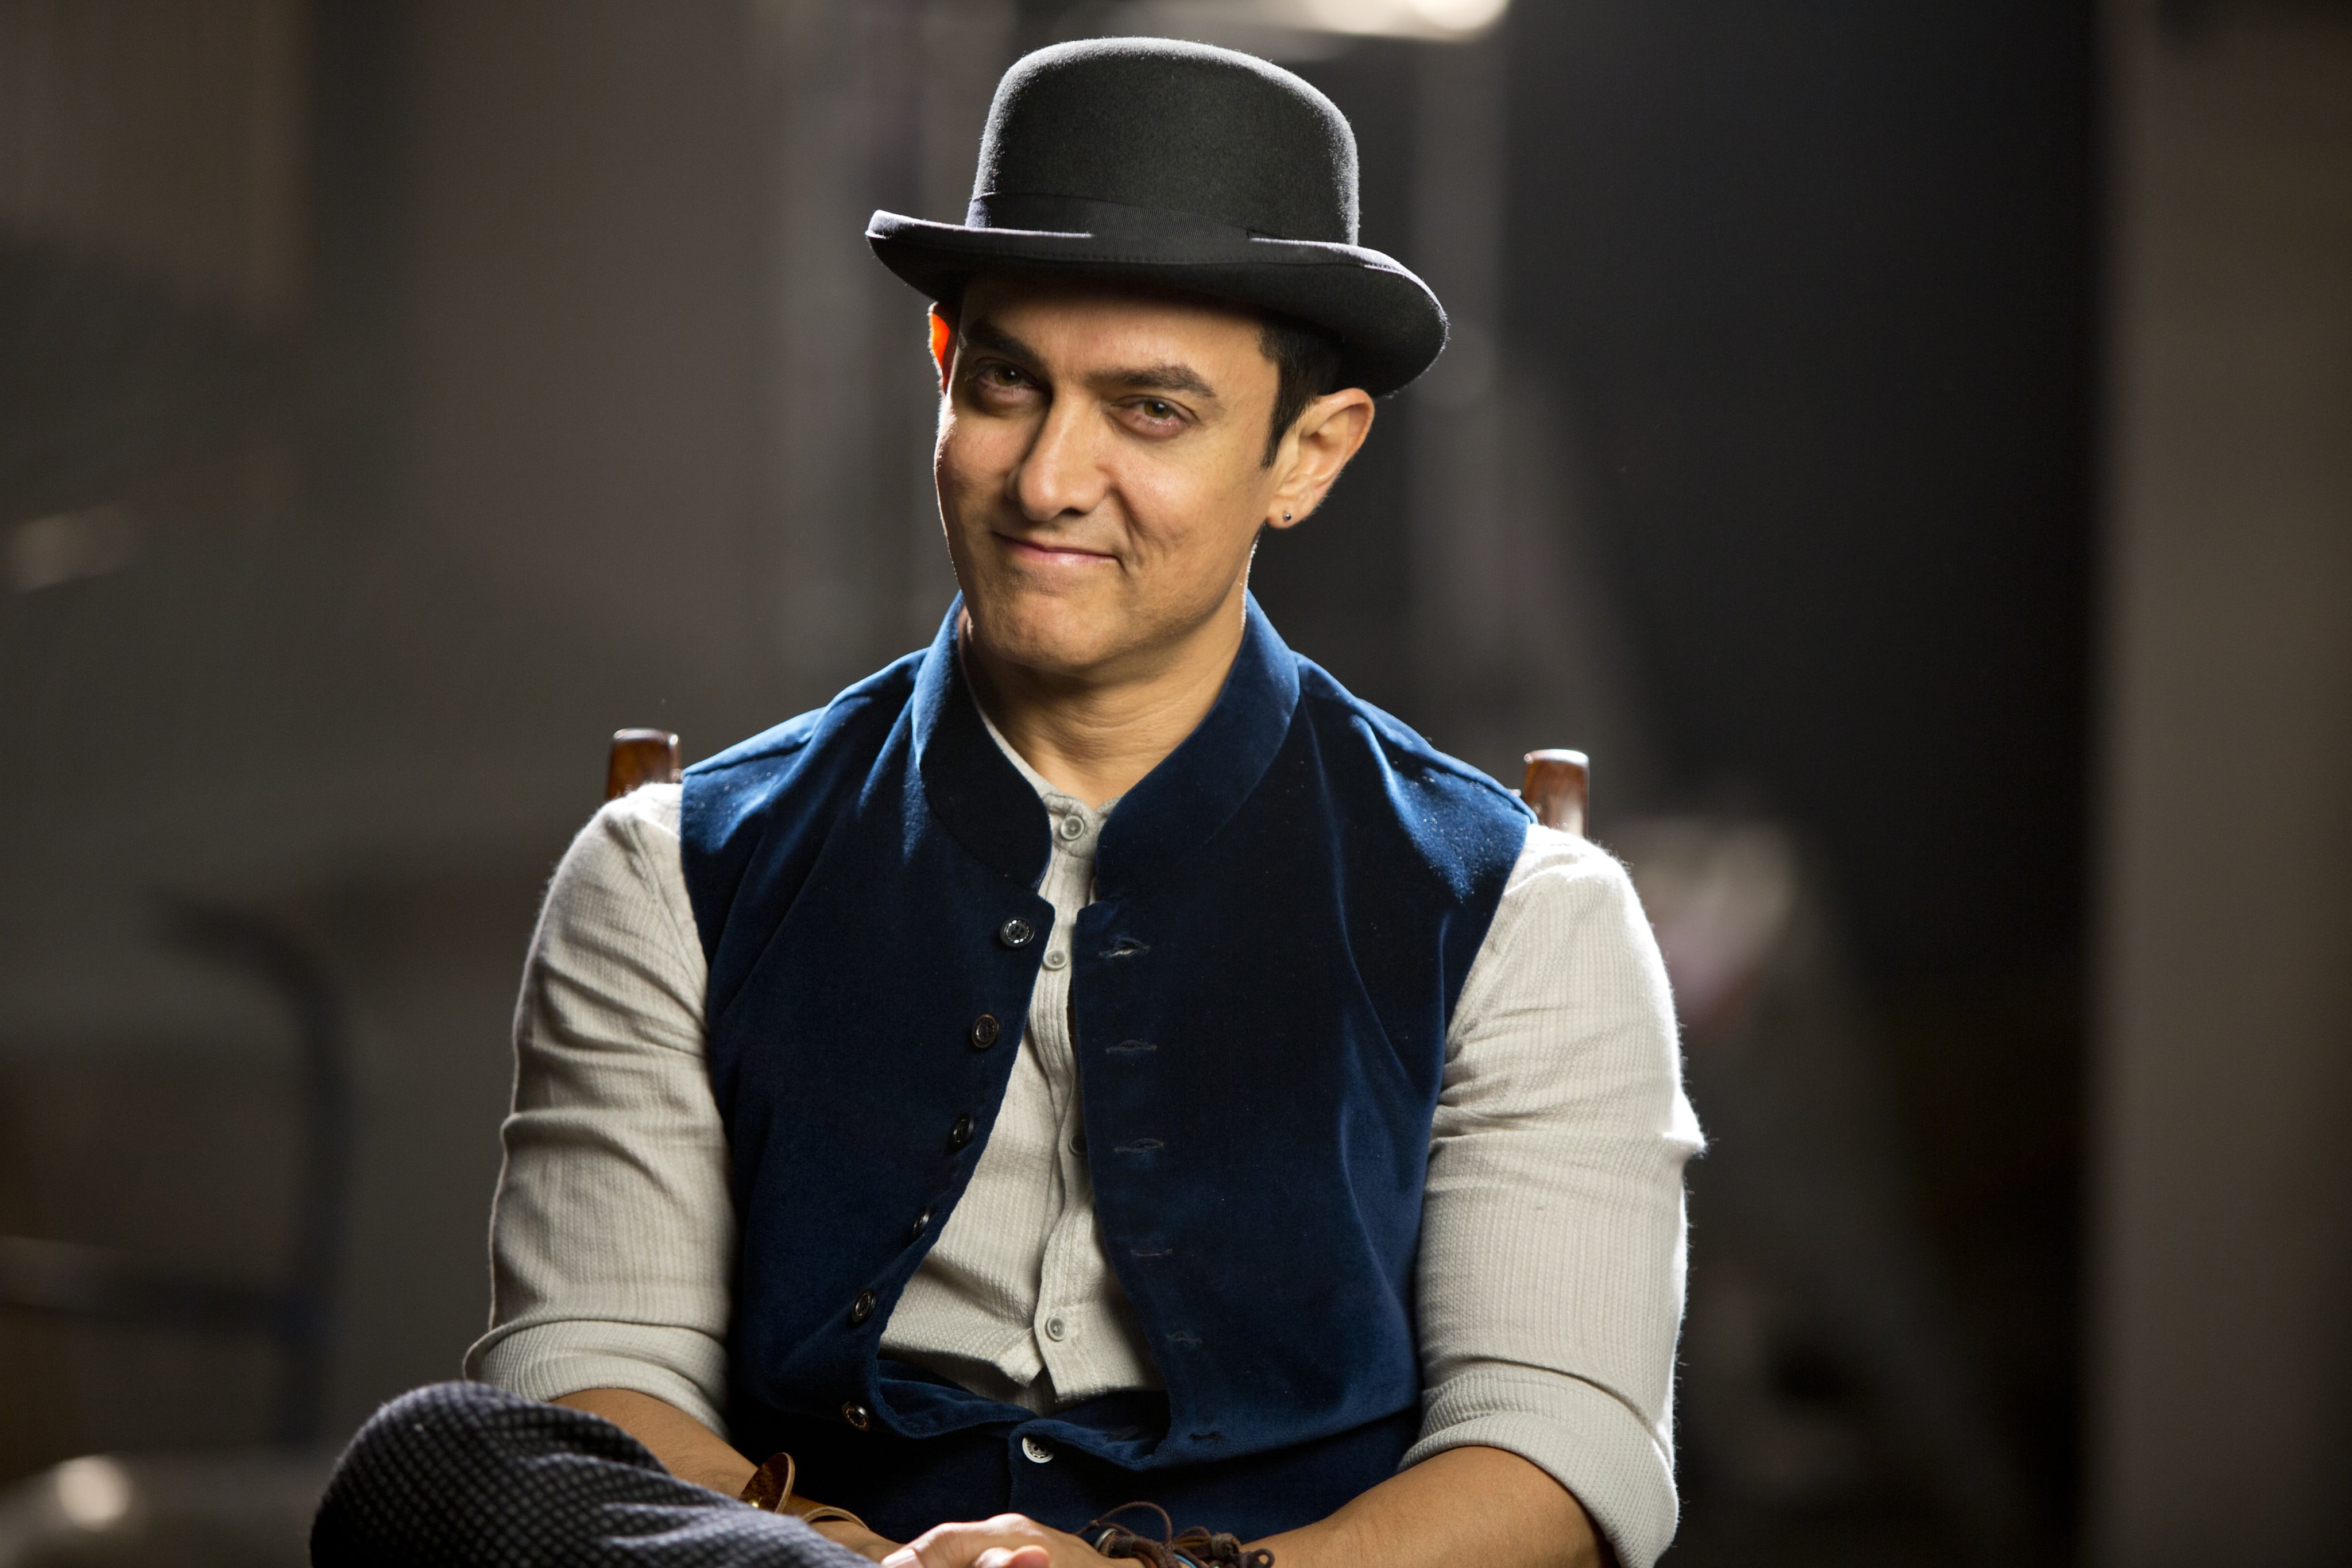 Man Wearing Blue Vest And White Shirt With Black Bowler Hat